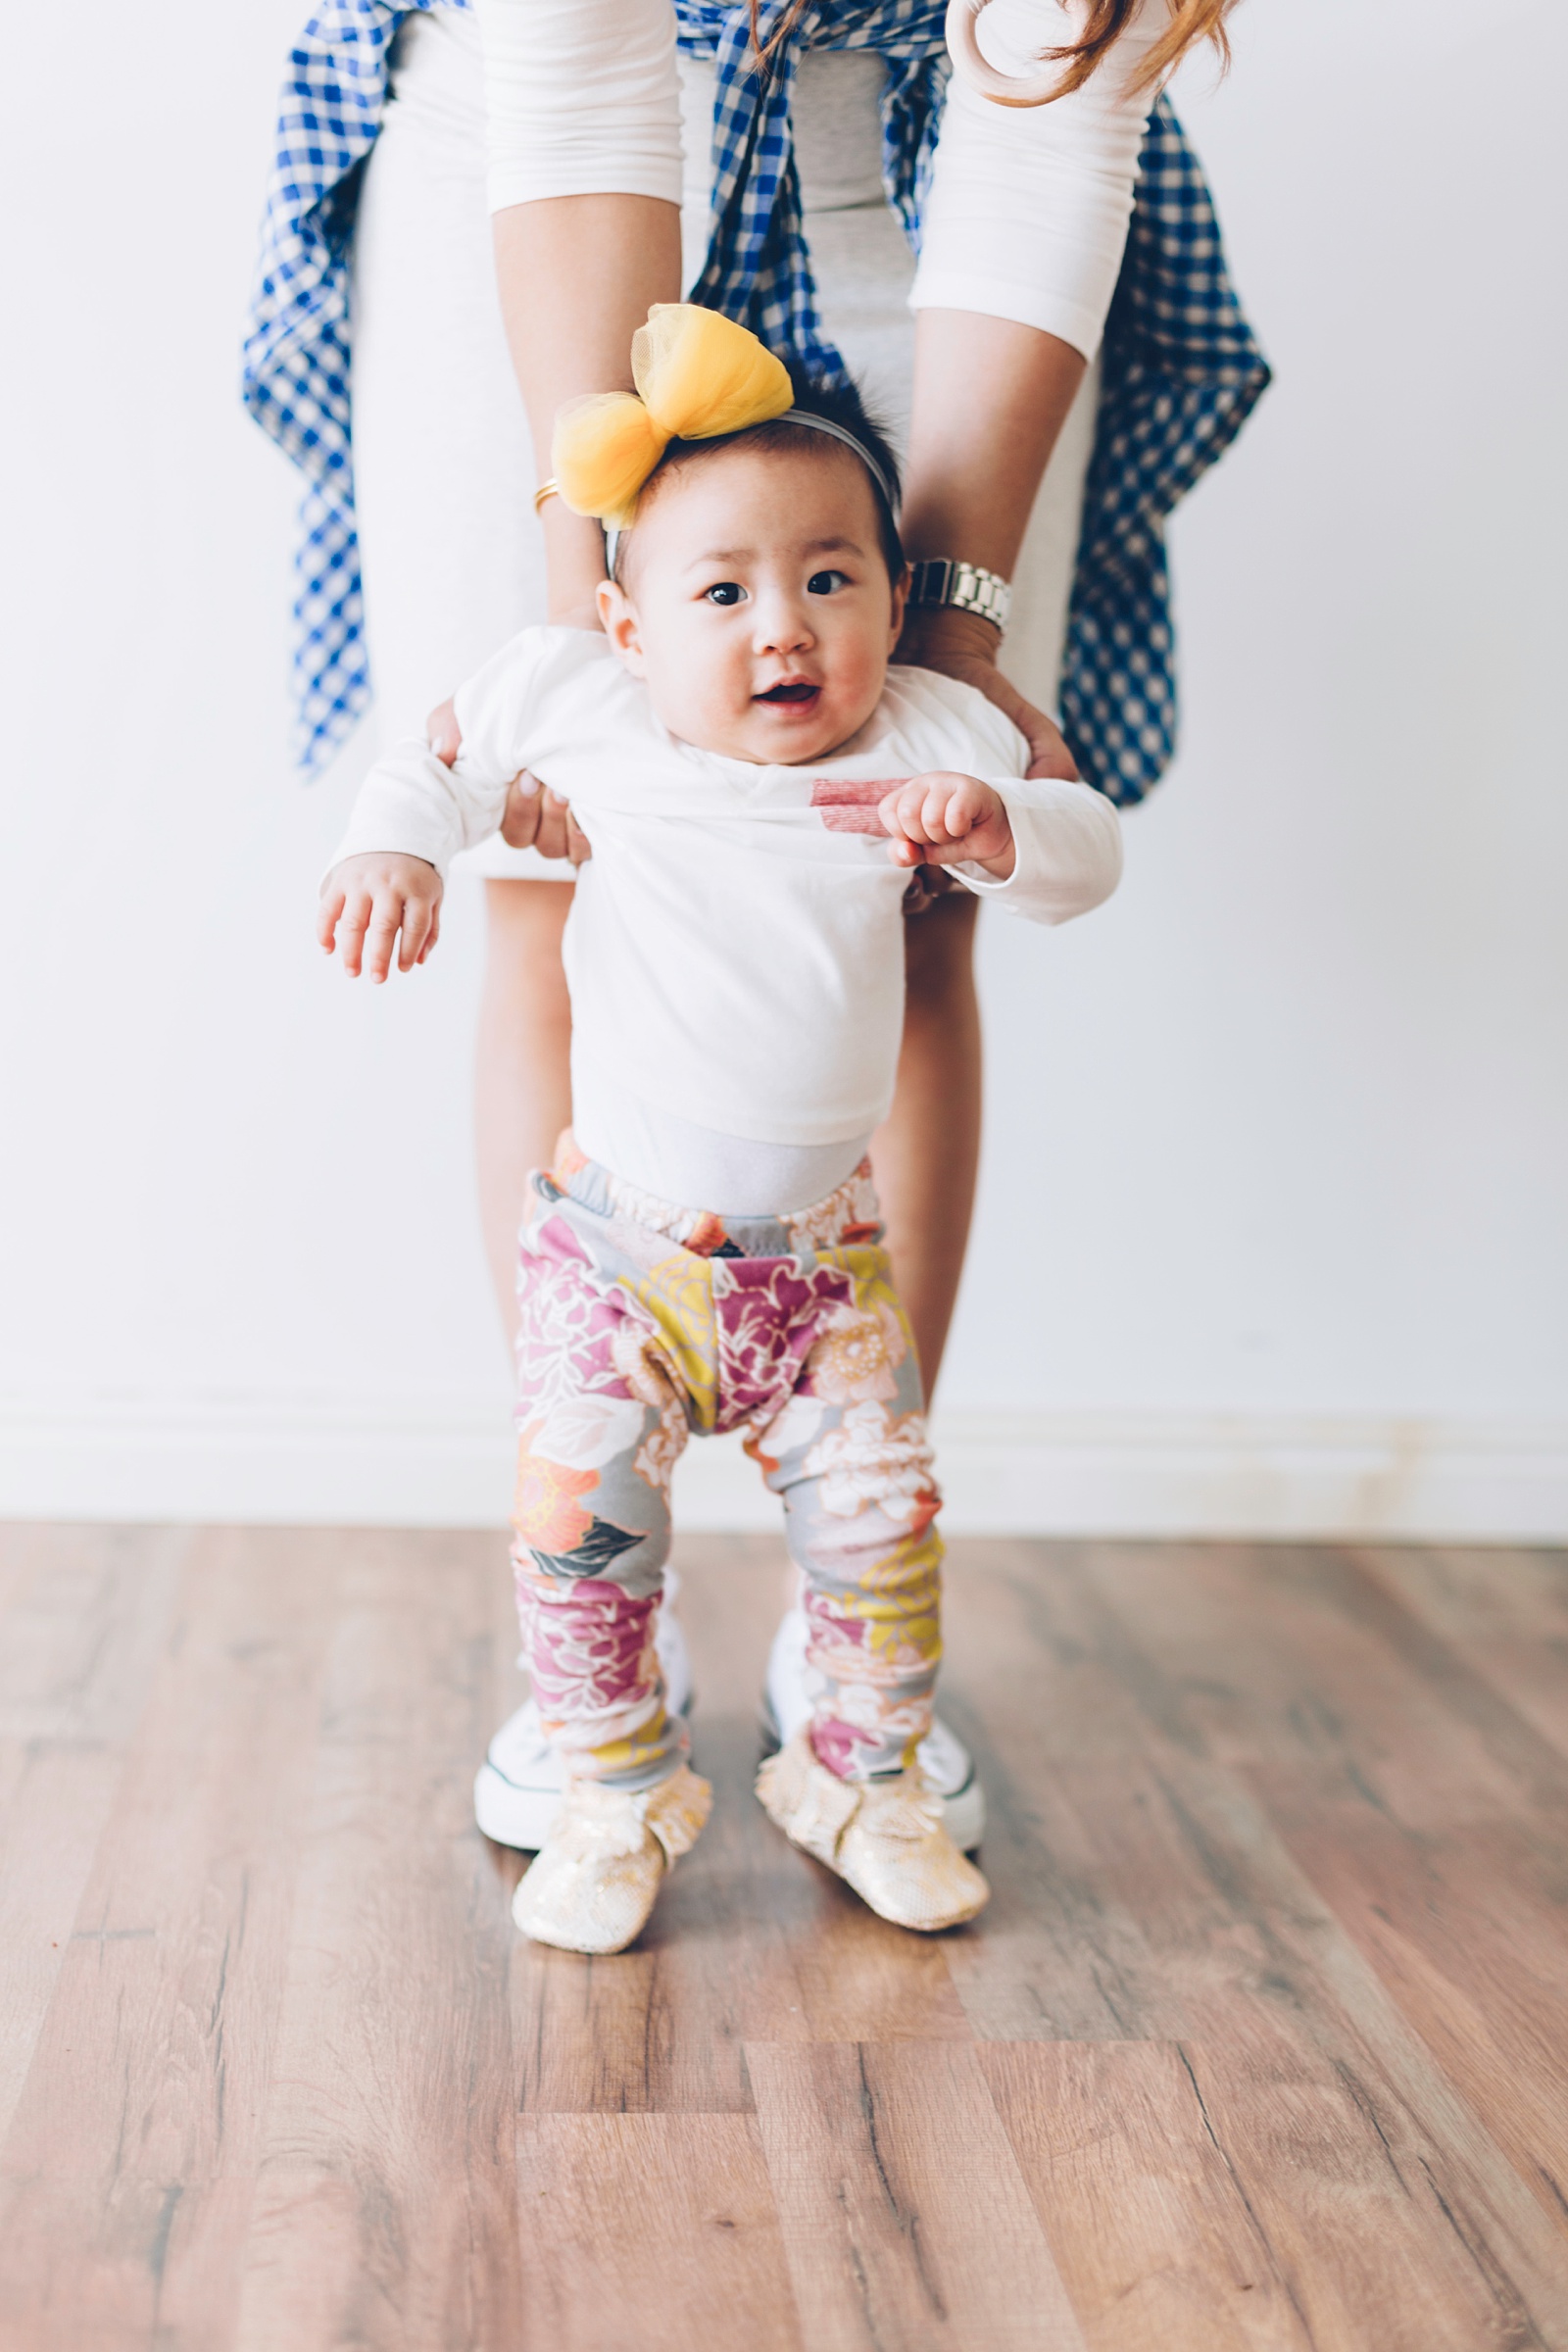 Sandy a la Mode | Mommy + Me fashion with The Vintage Honey Shop teething necklaces